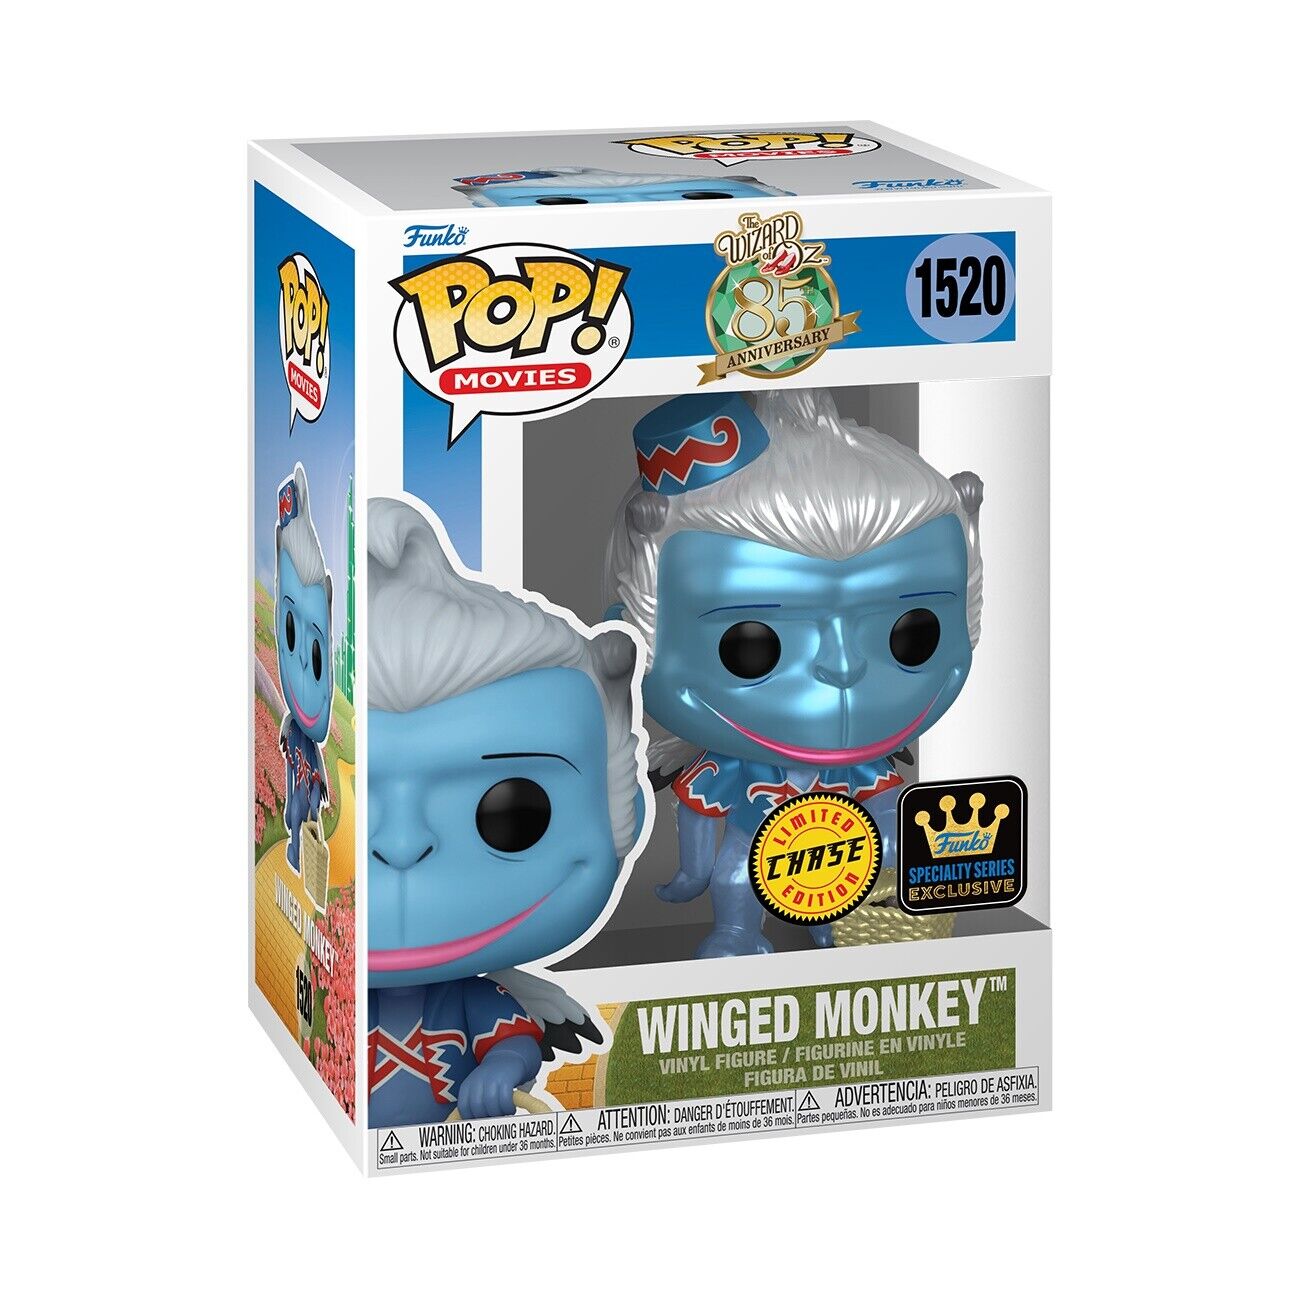 Funko POP The Wizard of Oz Winged Monkey Specialty Series CHASE VARIANT Figure